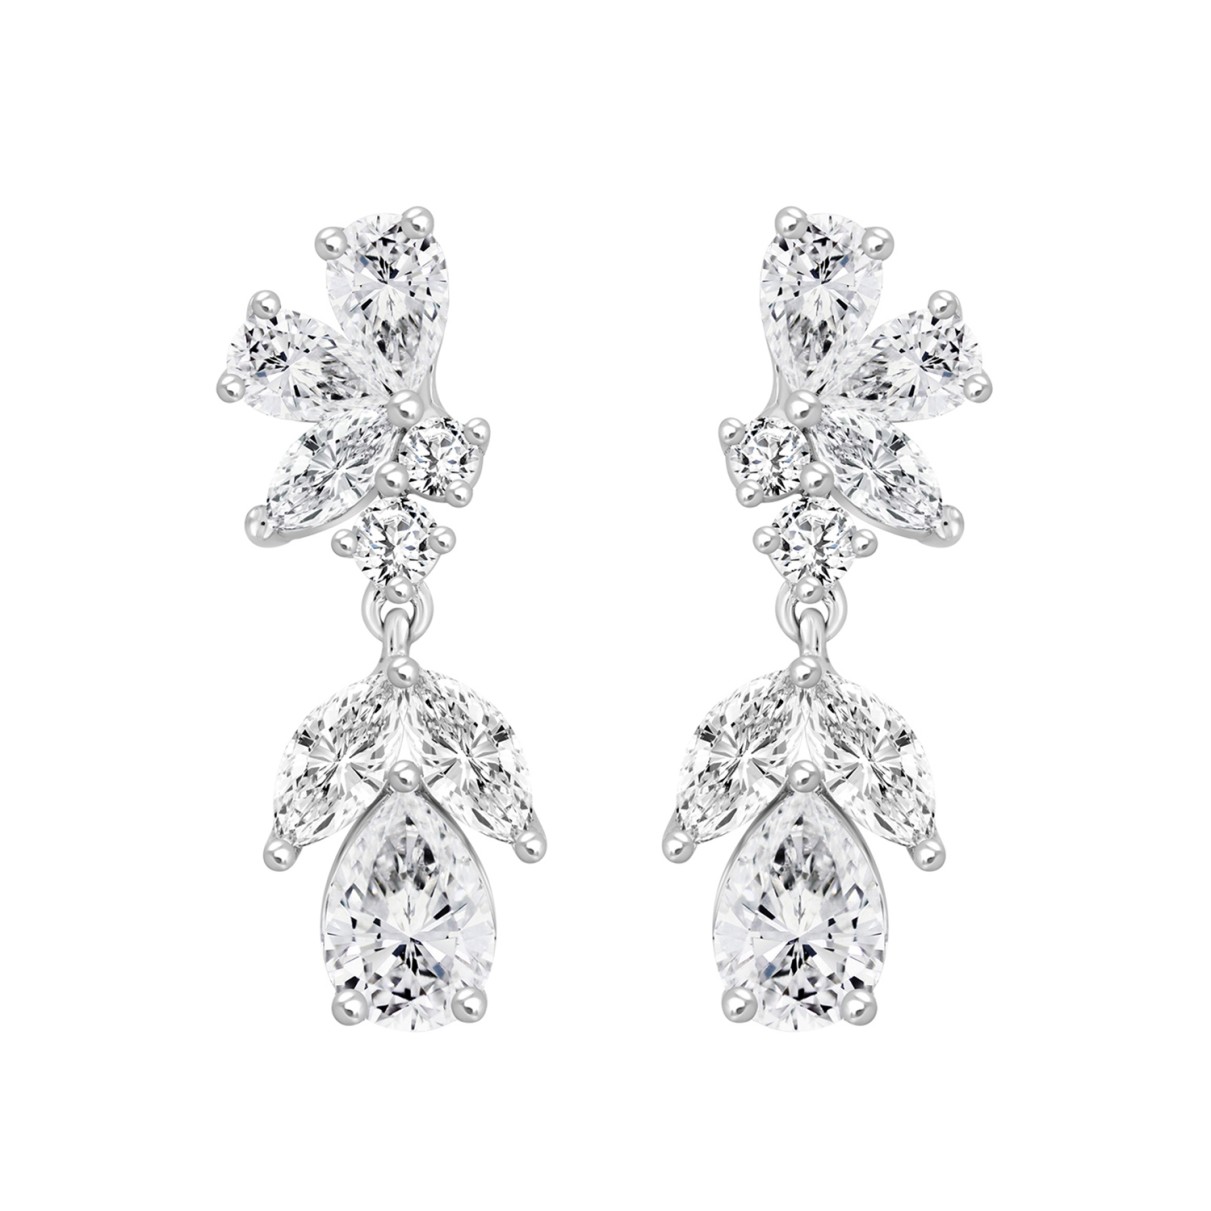 LADIES EARRINGS 4CT ROUND/MARQUISE/PEAR DIAMOND 14K WHITE GOLD